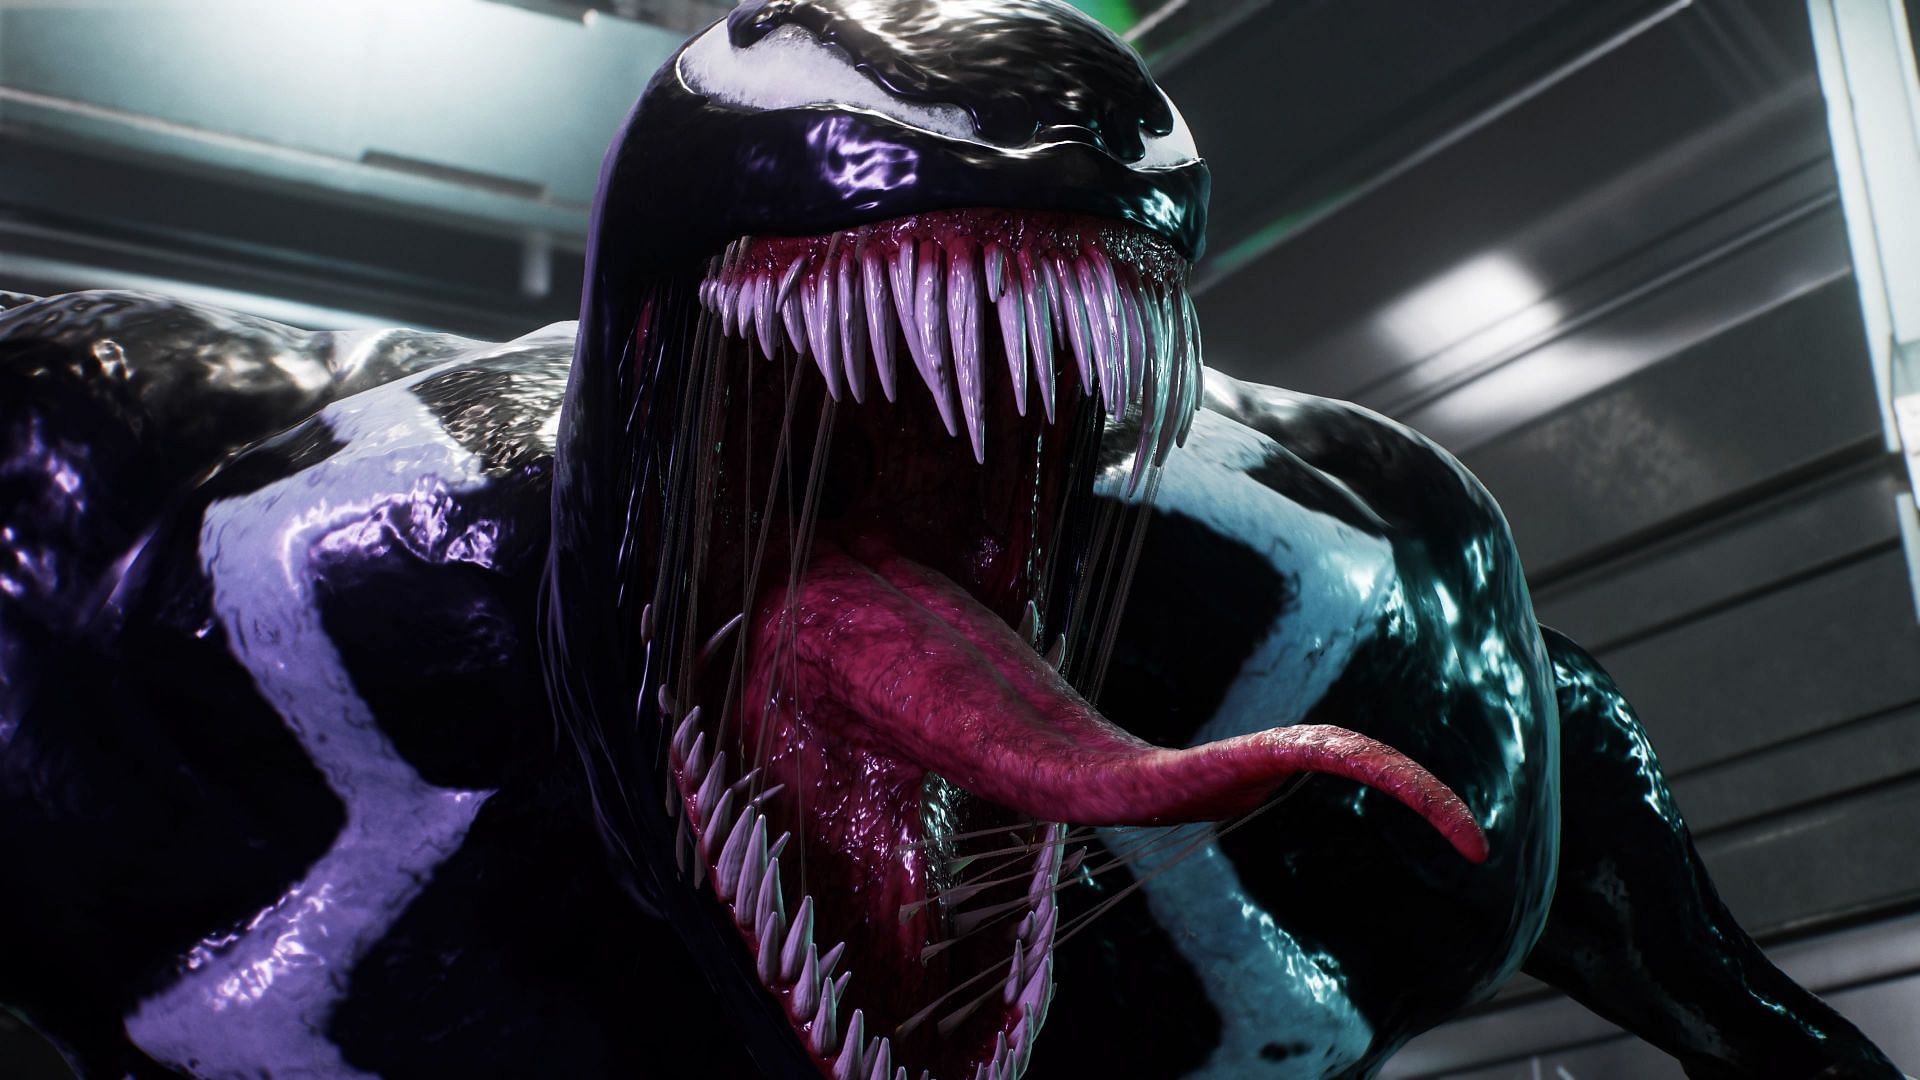 Who is Venom in Spider-Man 2 on PS5?